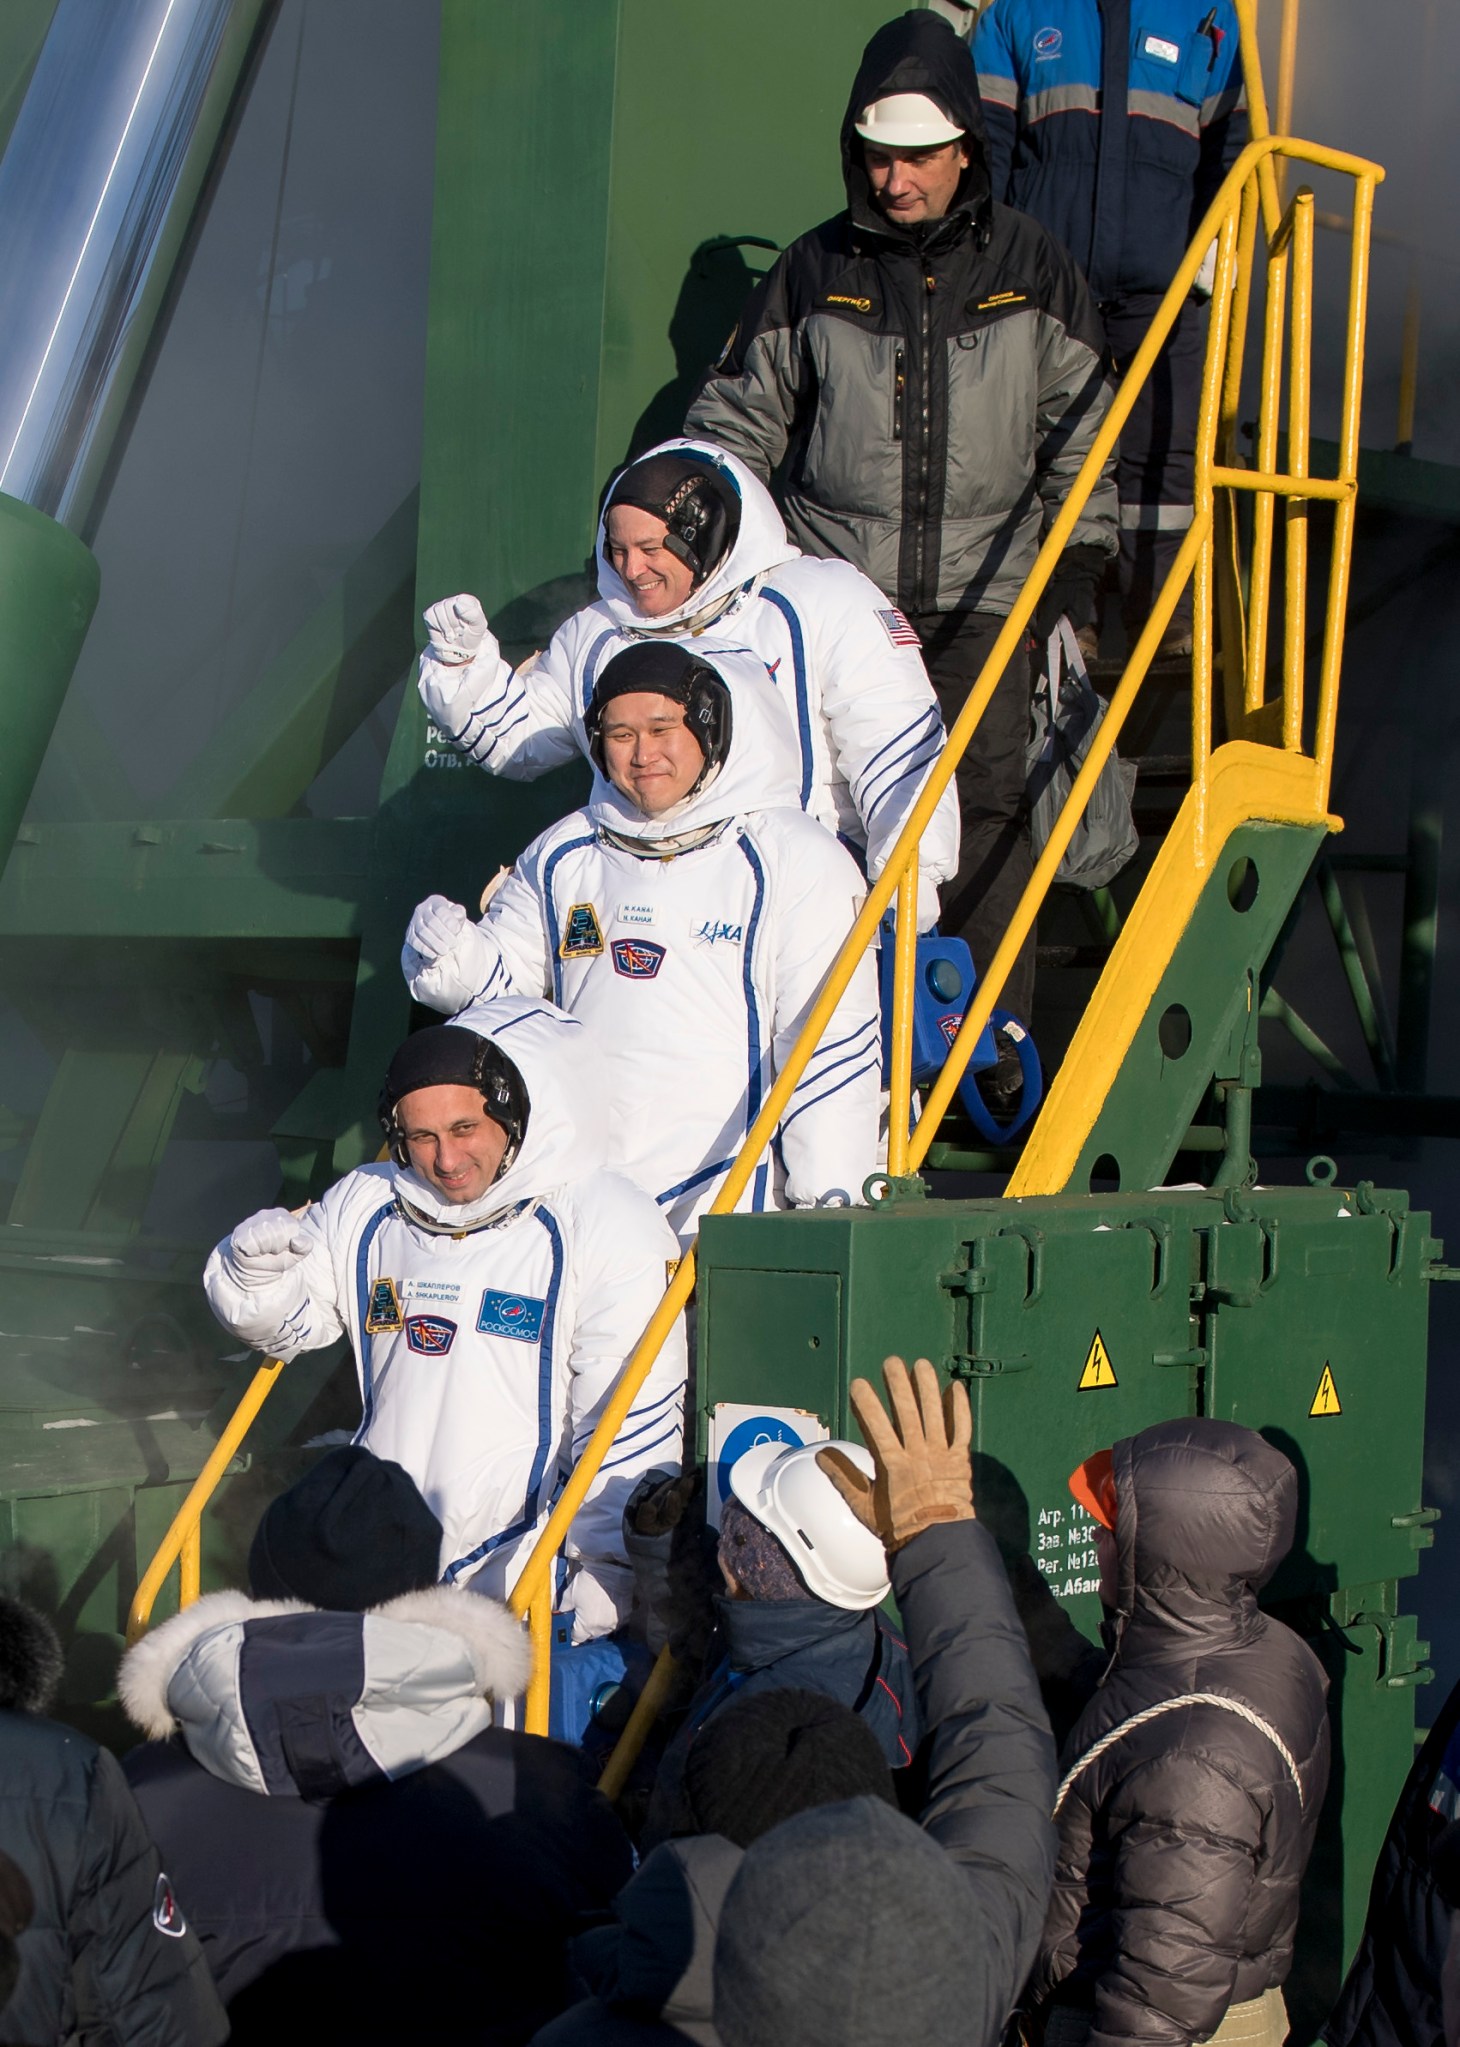 Expedition 54 waves farewell prior to their Dec. 17, 2017 launch.